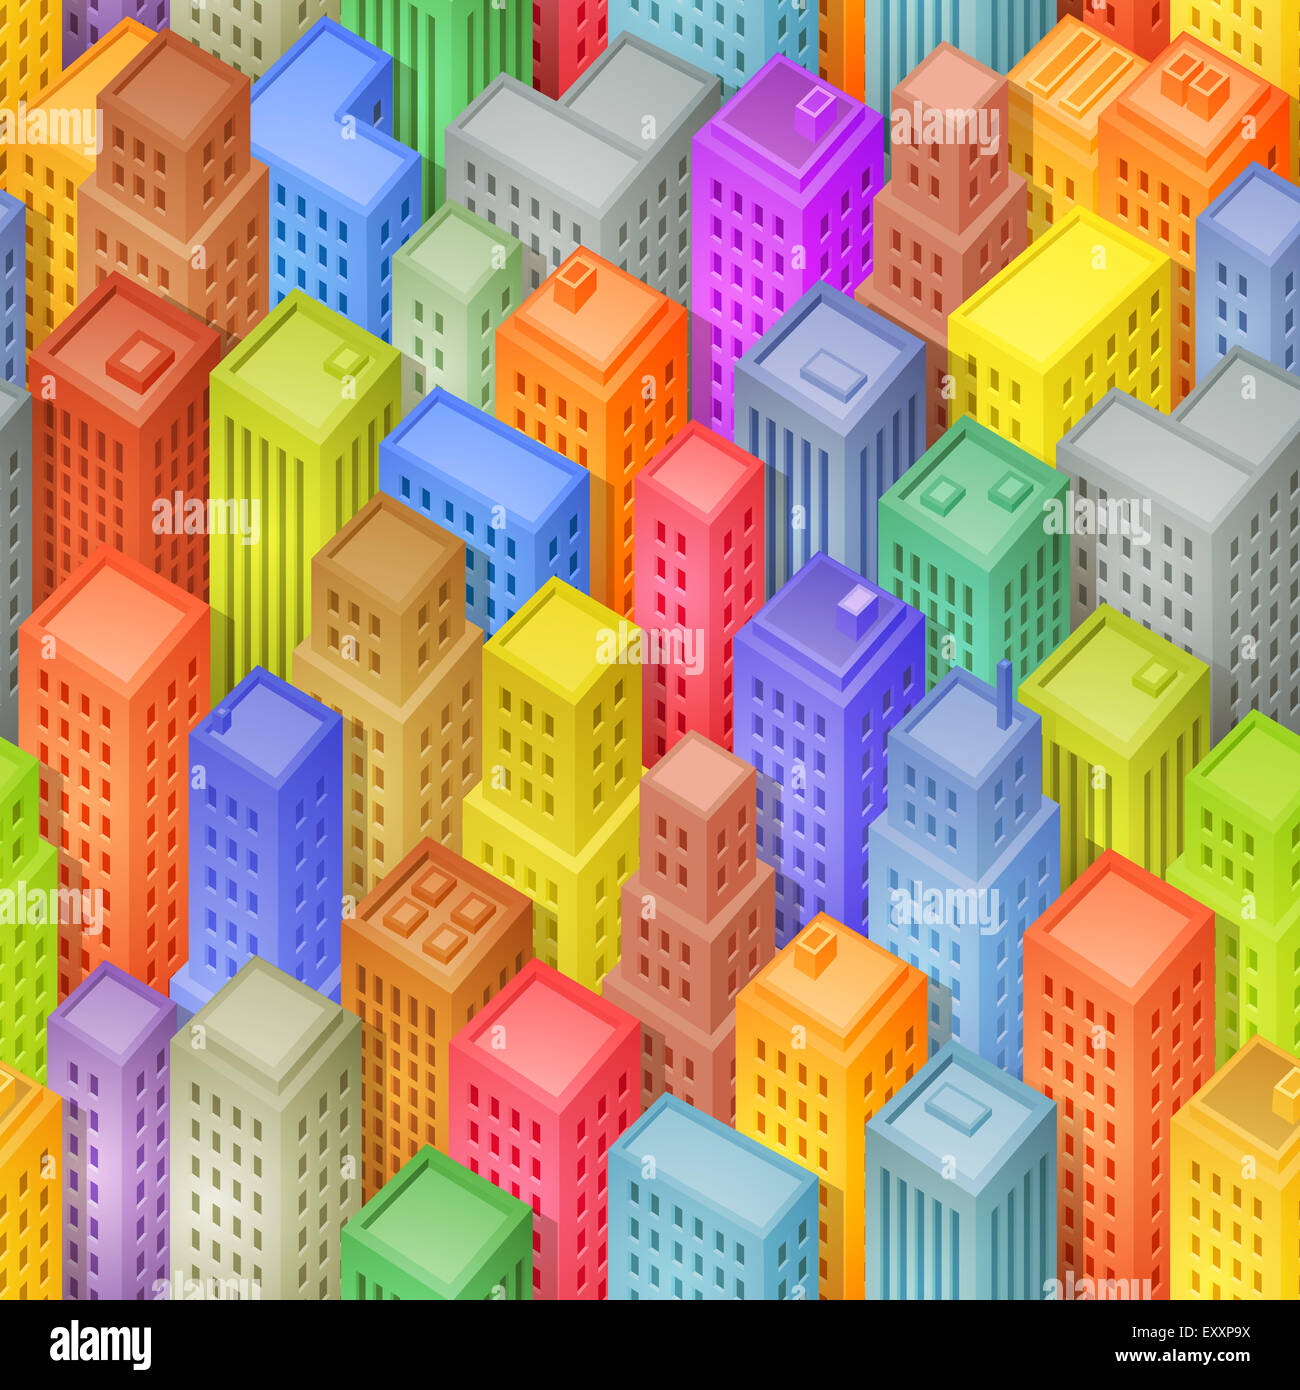 Illustration of a seamless funny cartoon squared big city background with several isometric buildings Stock Photo